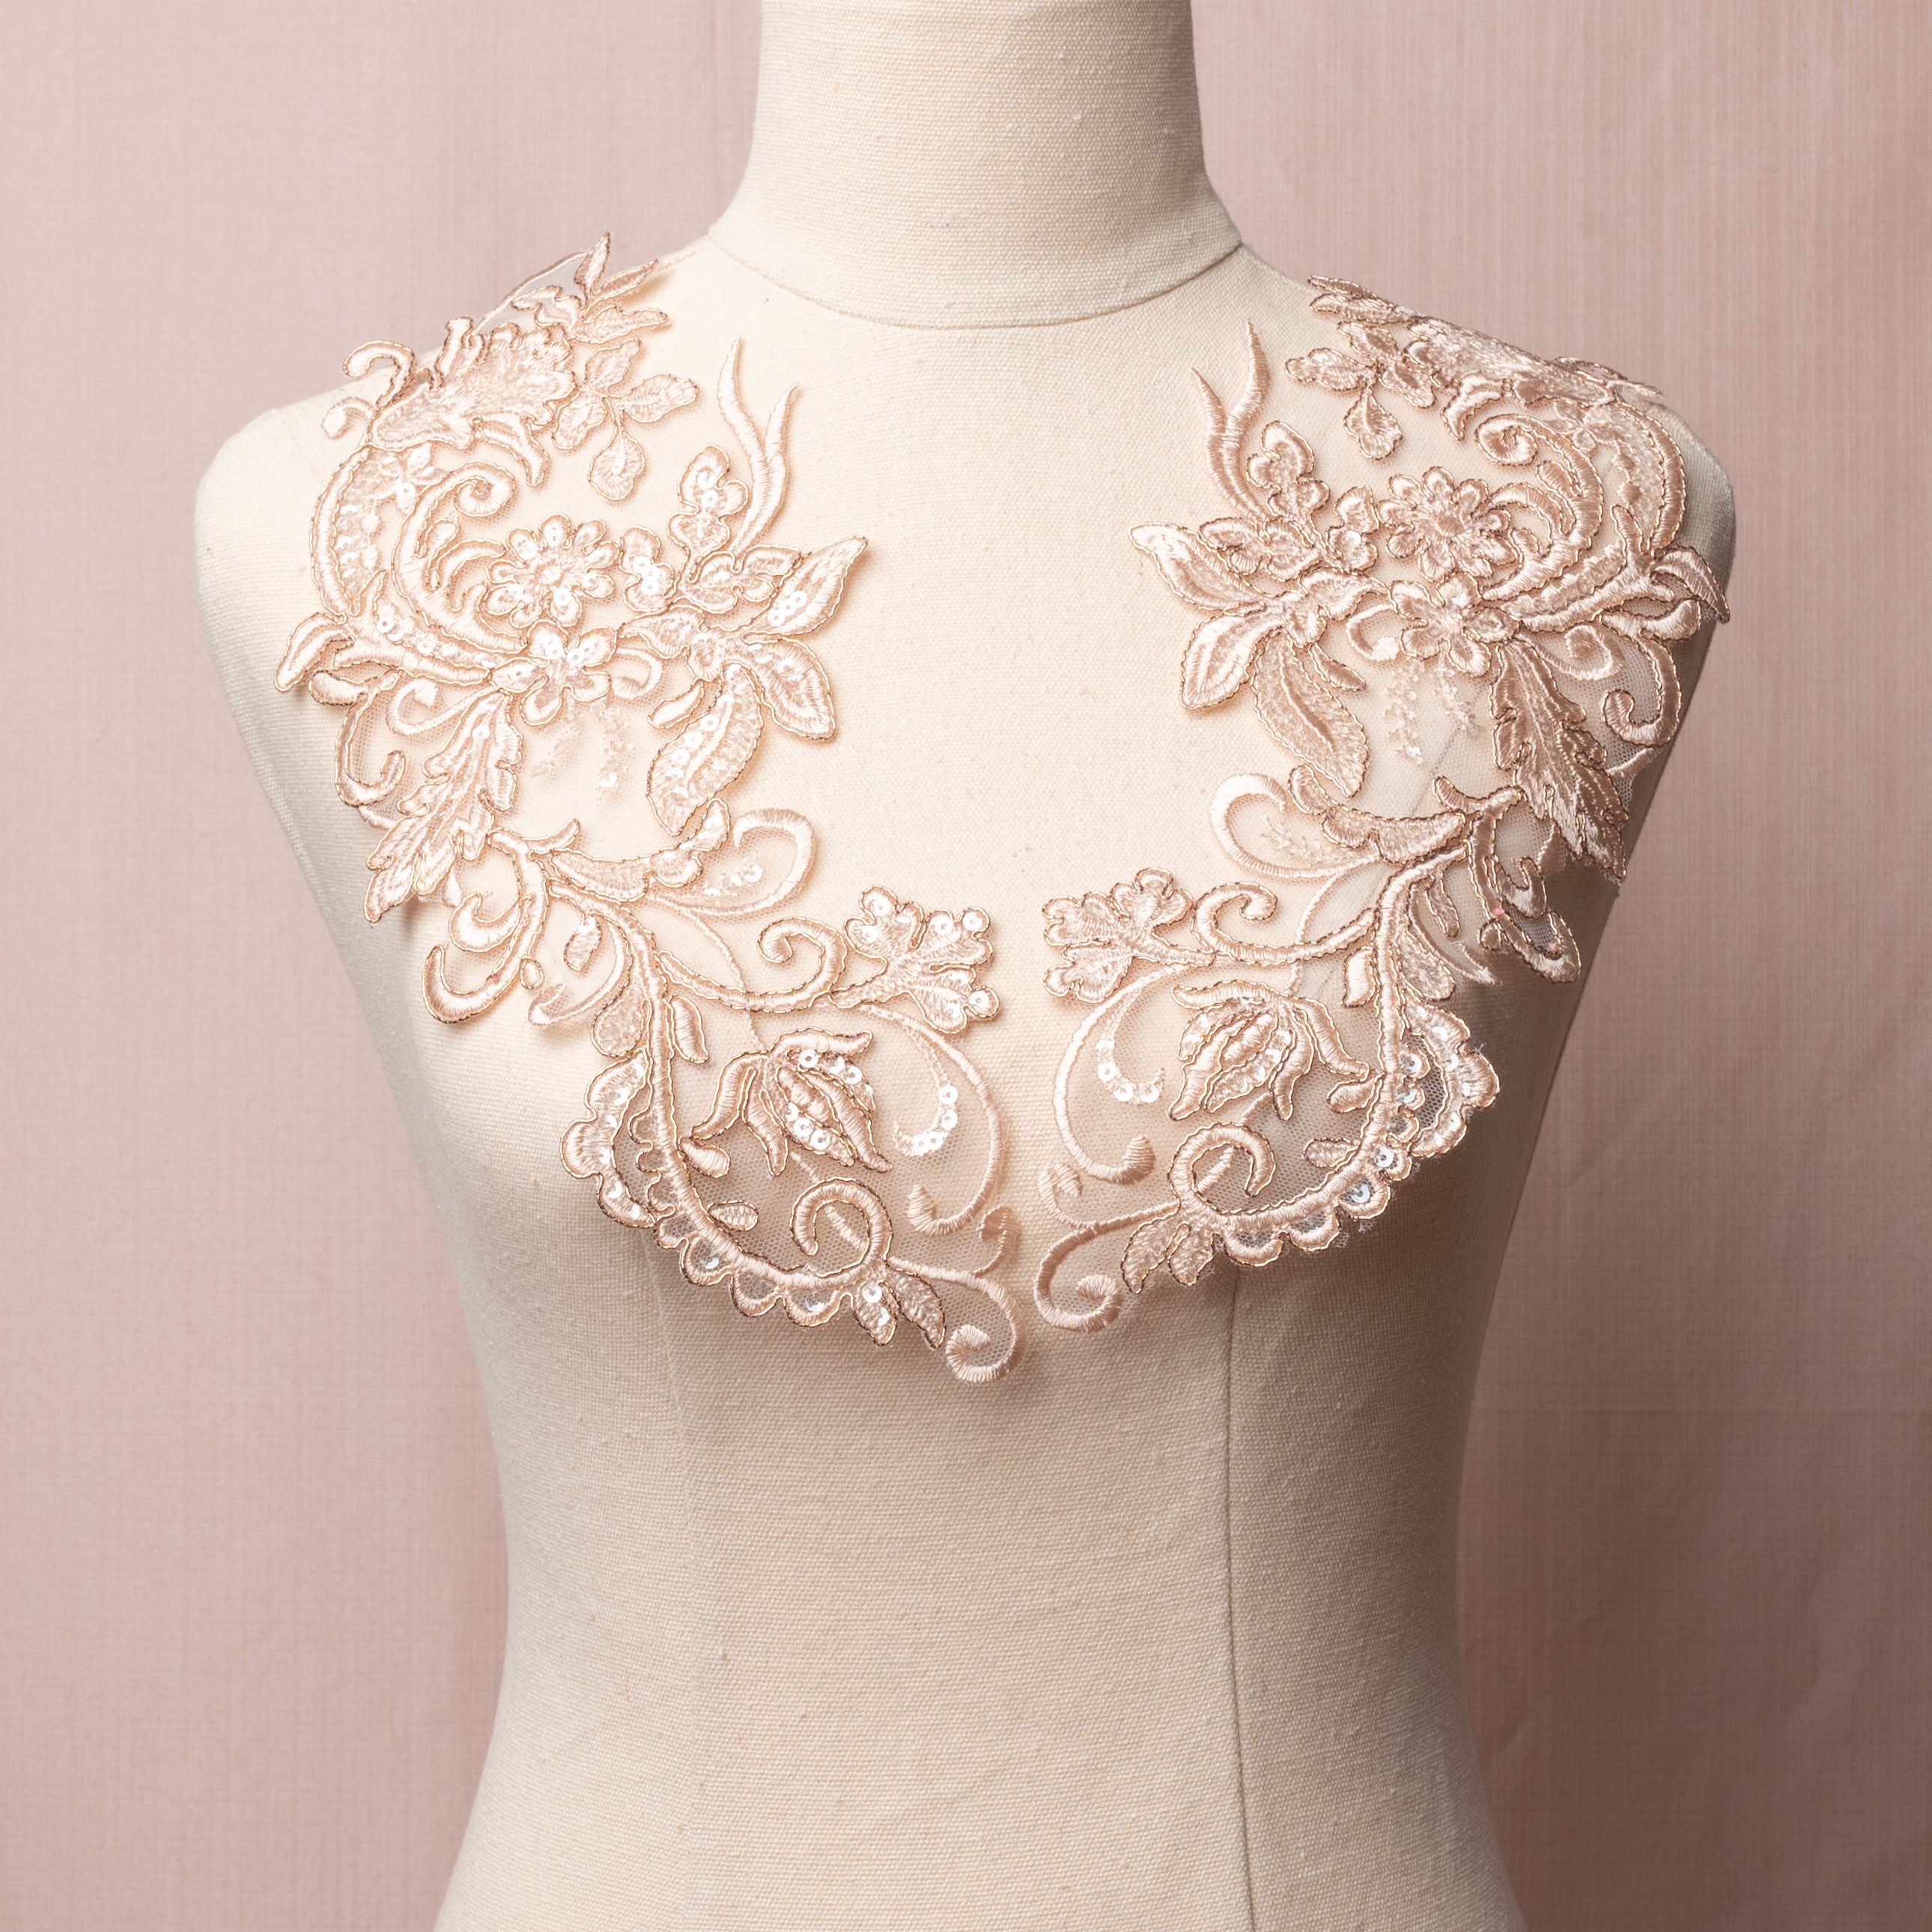 Mirrored pair of rose gold floral appliques embellished with clear sequins displayed on a mannequin.